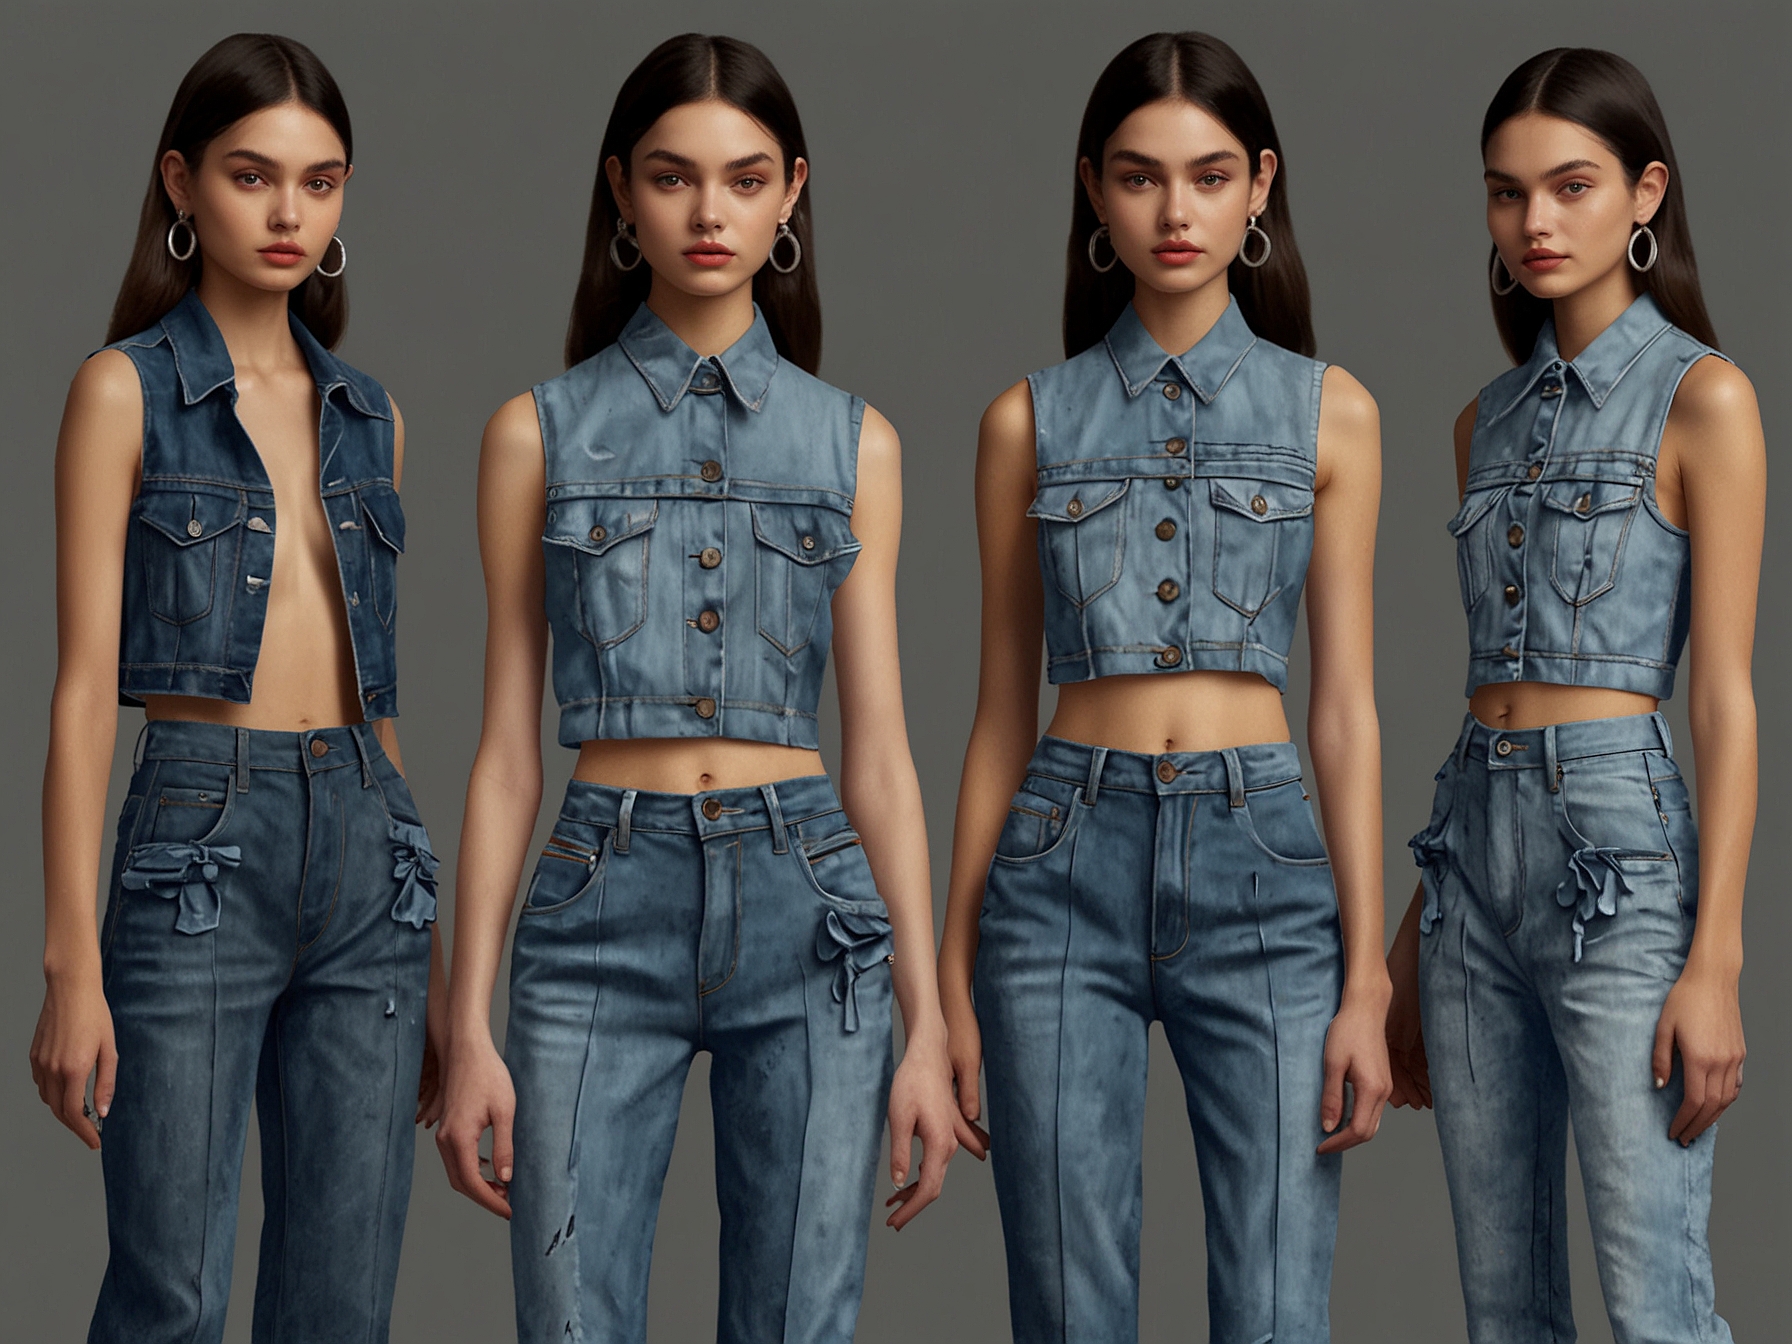 Models showcasing Dhruv Kapoor's SS25 designs, including two-piece sets, washed denim with mascots, and crinkled leather vests, reflecting a blend of playful innocence and mature sophistication.